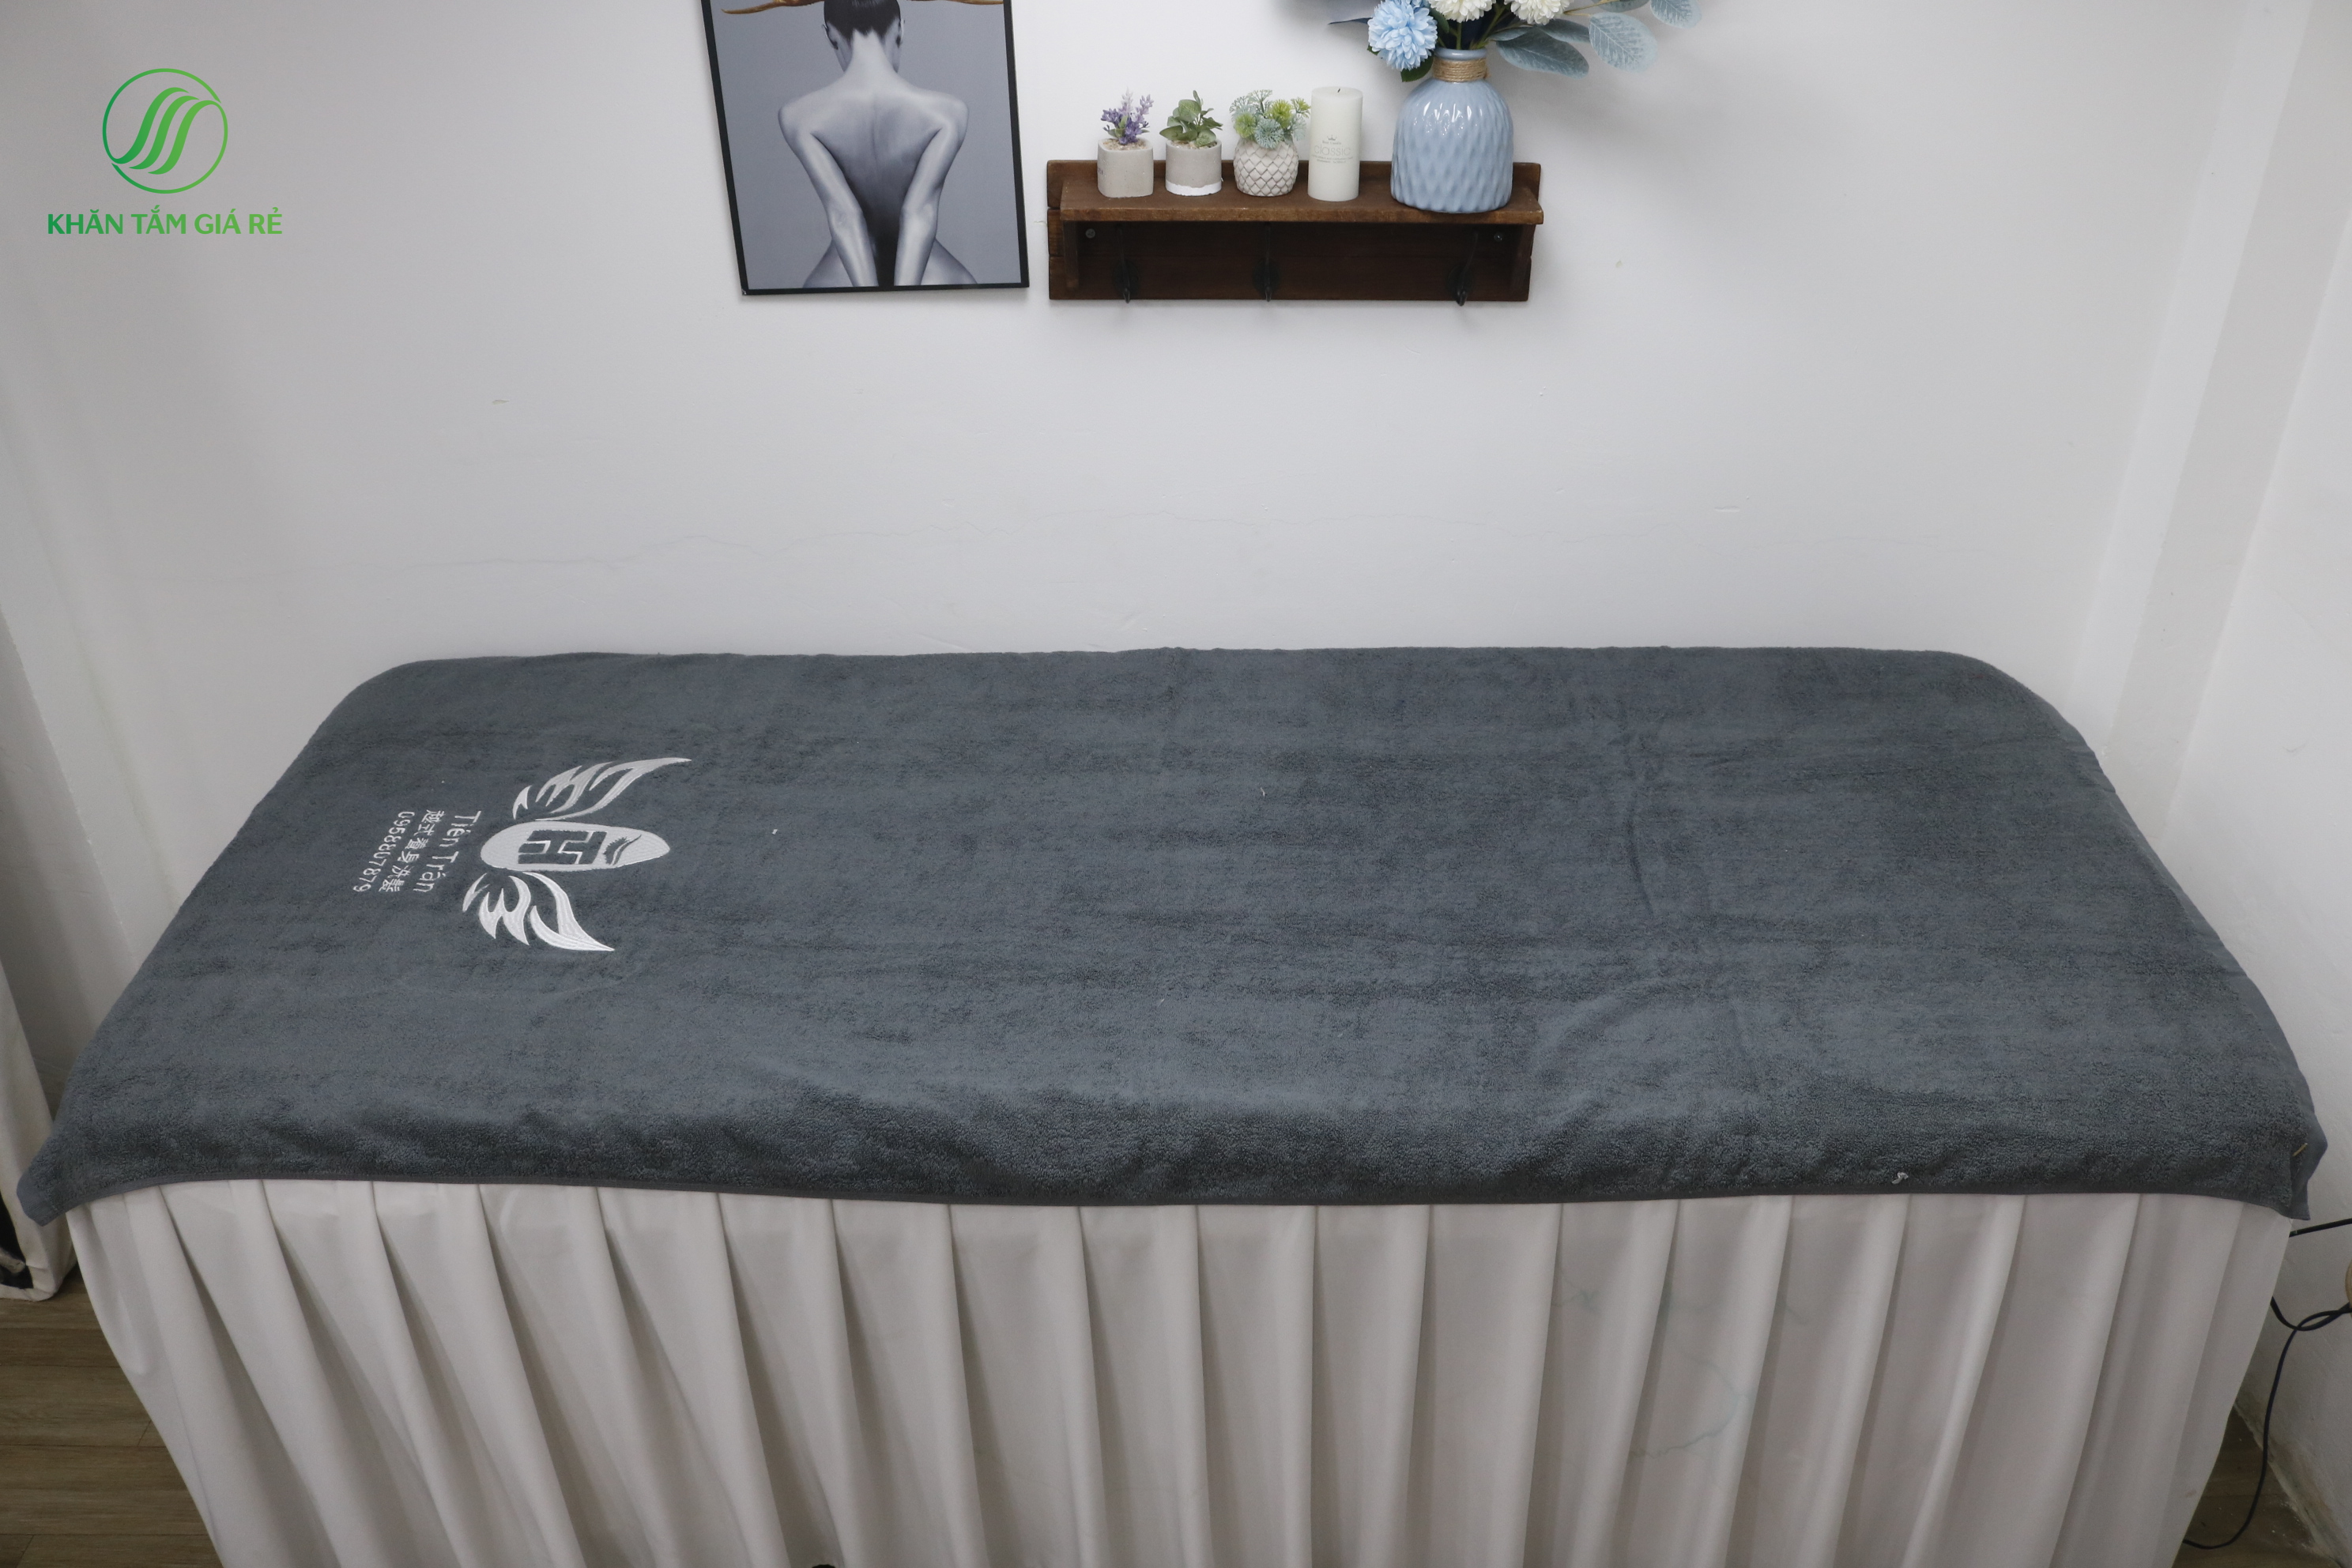 Logo print towel spa is a strategy to promote low-cost but highly effective